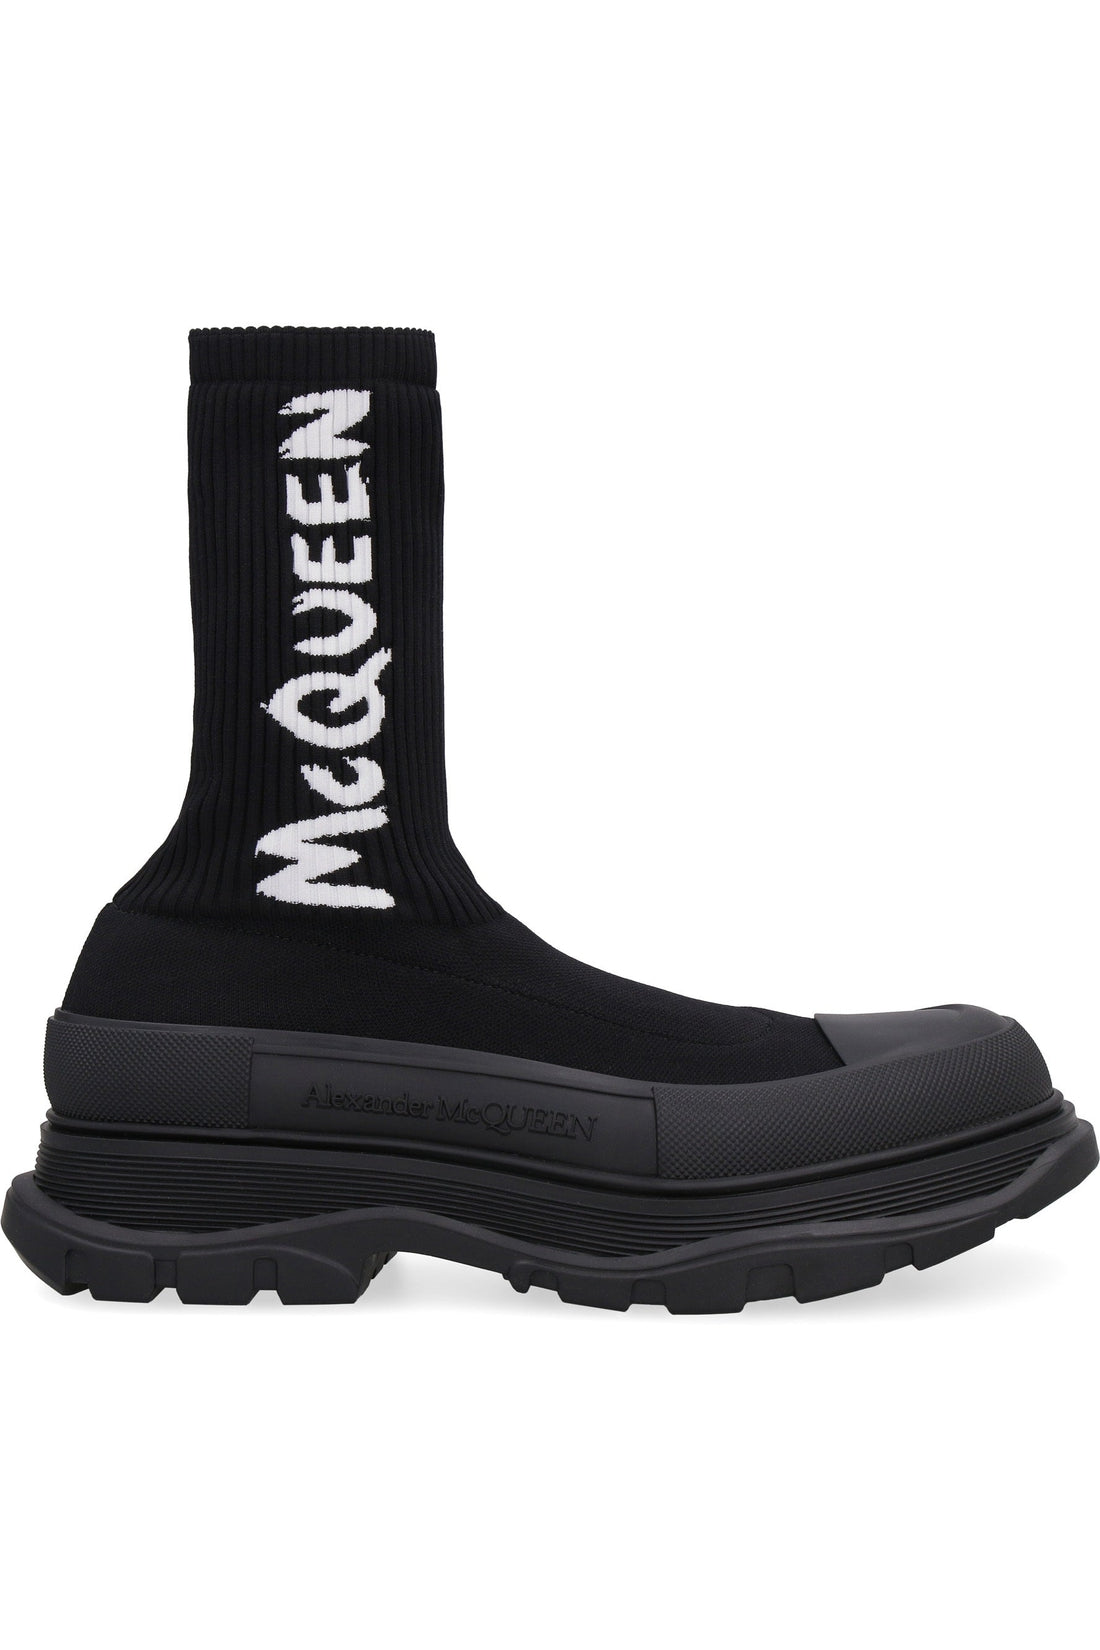 Alexander McQueen-OUTLET-SALE-Tread Slick knitted ankle boots-ARCHIVIST